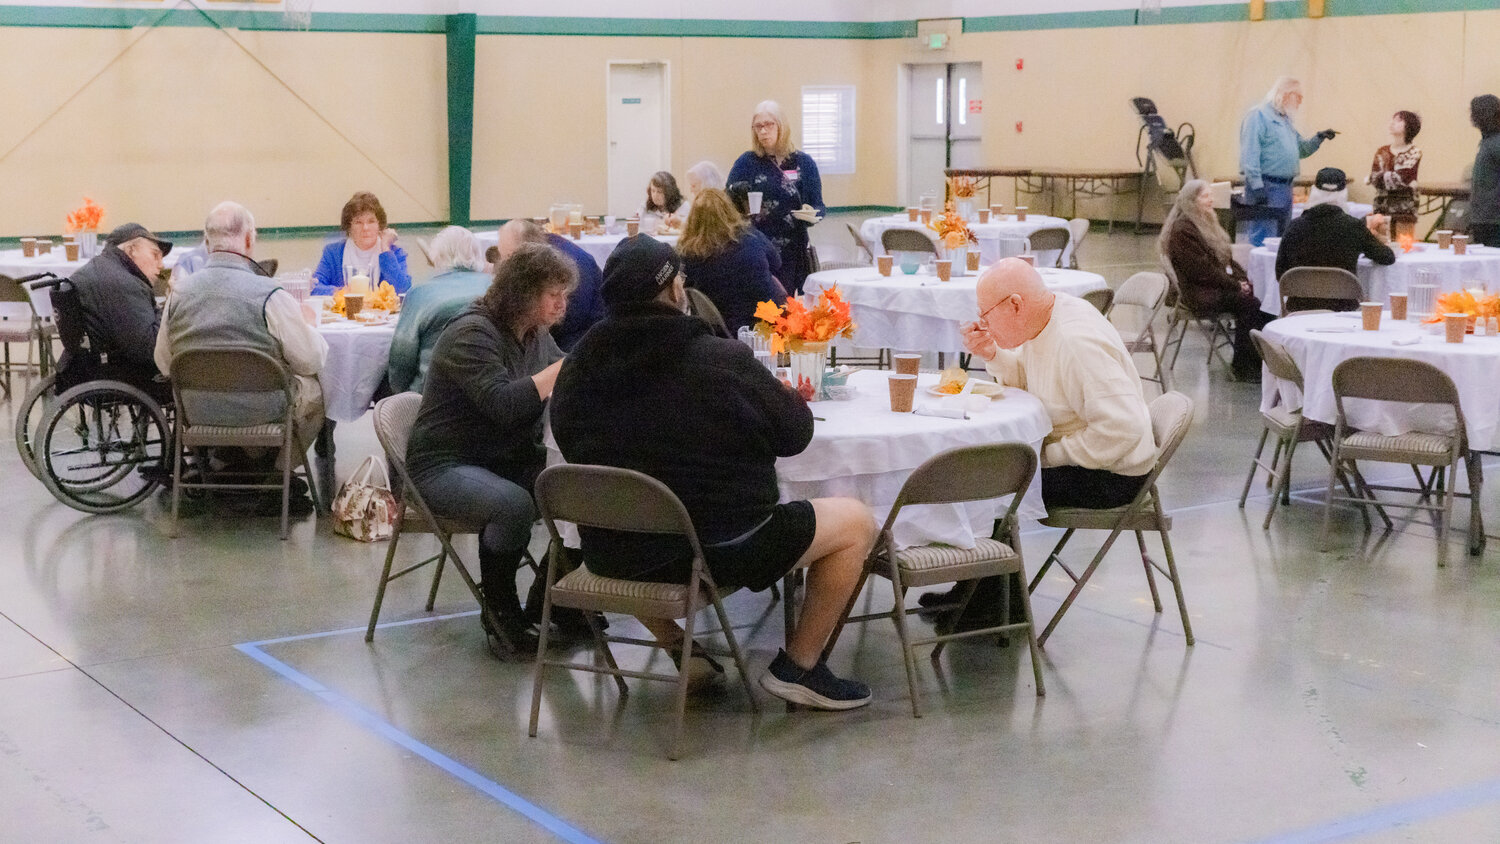 Visitors mingle and eat together on Thanksgiving at Immanuel Lutheran Church in Centralia Thursday, Nov. 23.